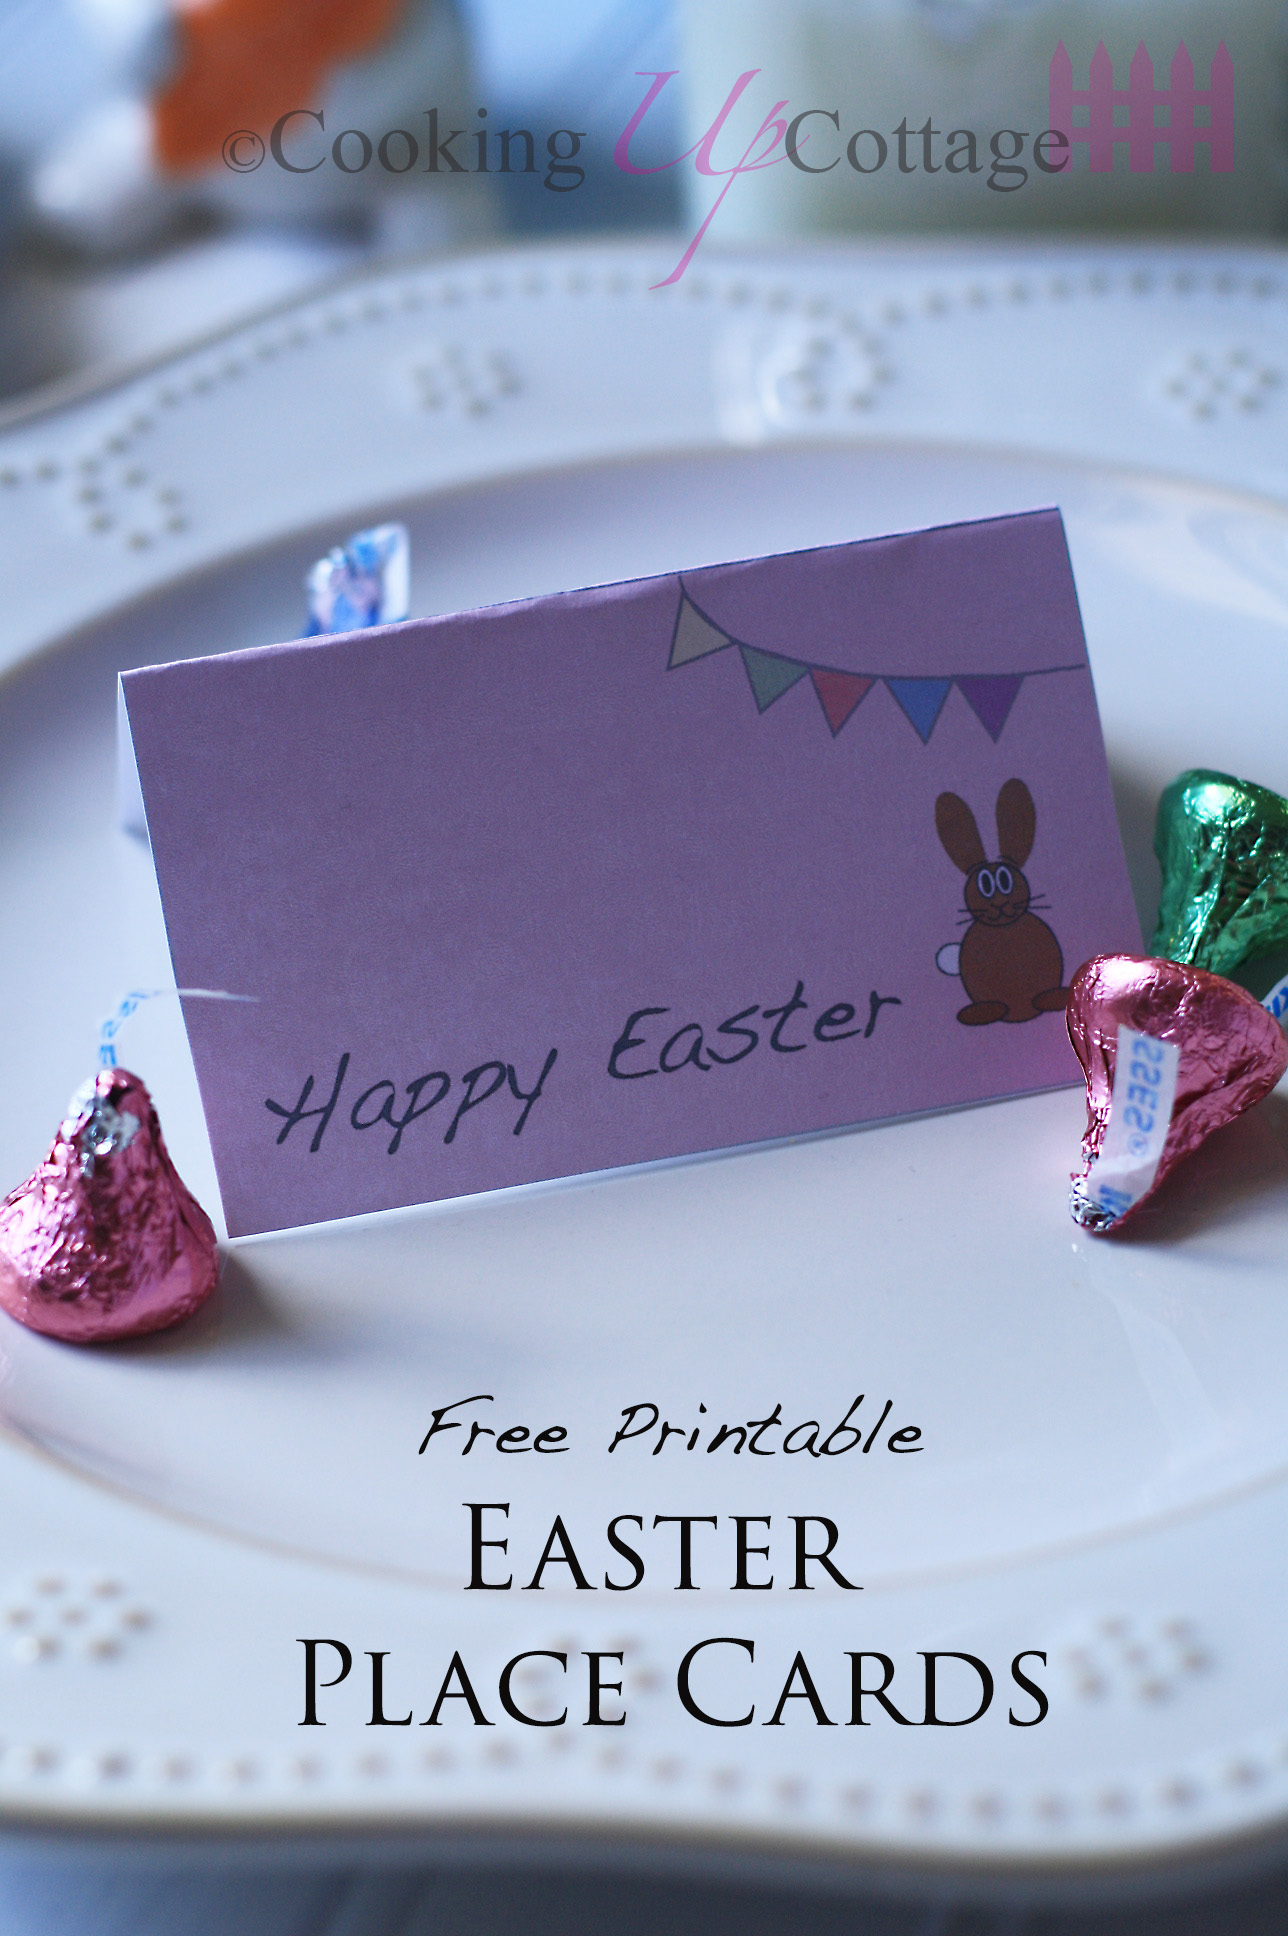 free-printable-easter-place-cards-cooking-up-cottage